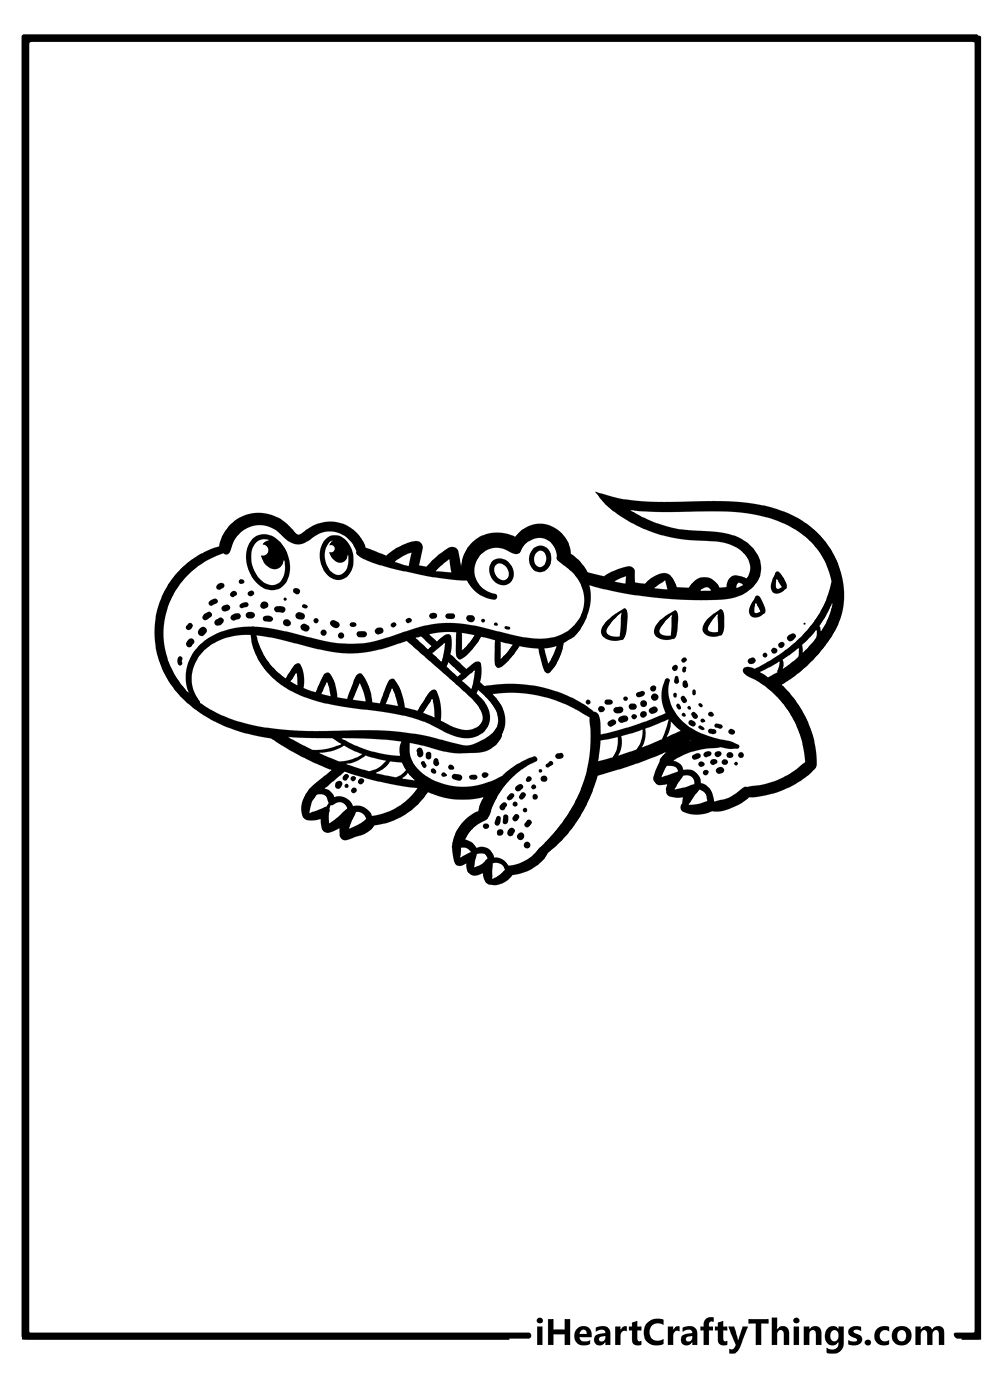 Crocodile Coloring Pages for kids free download